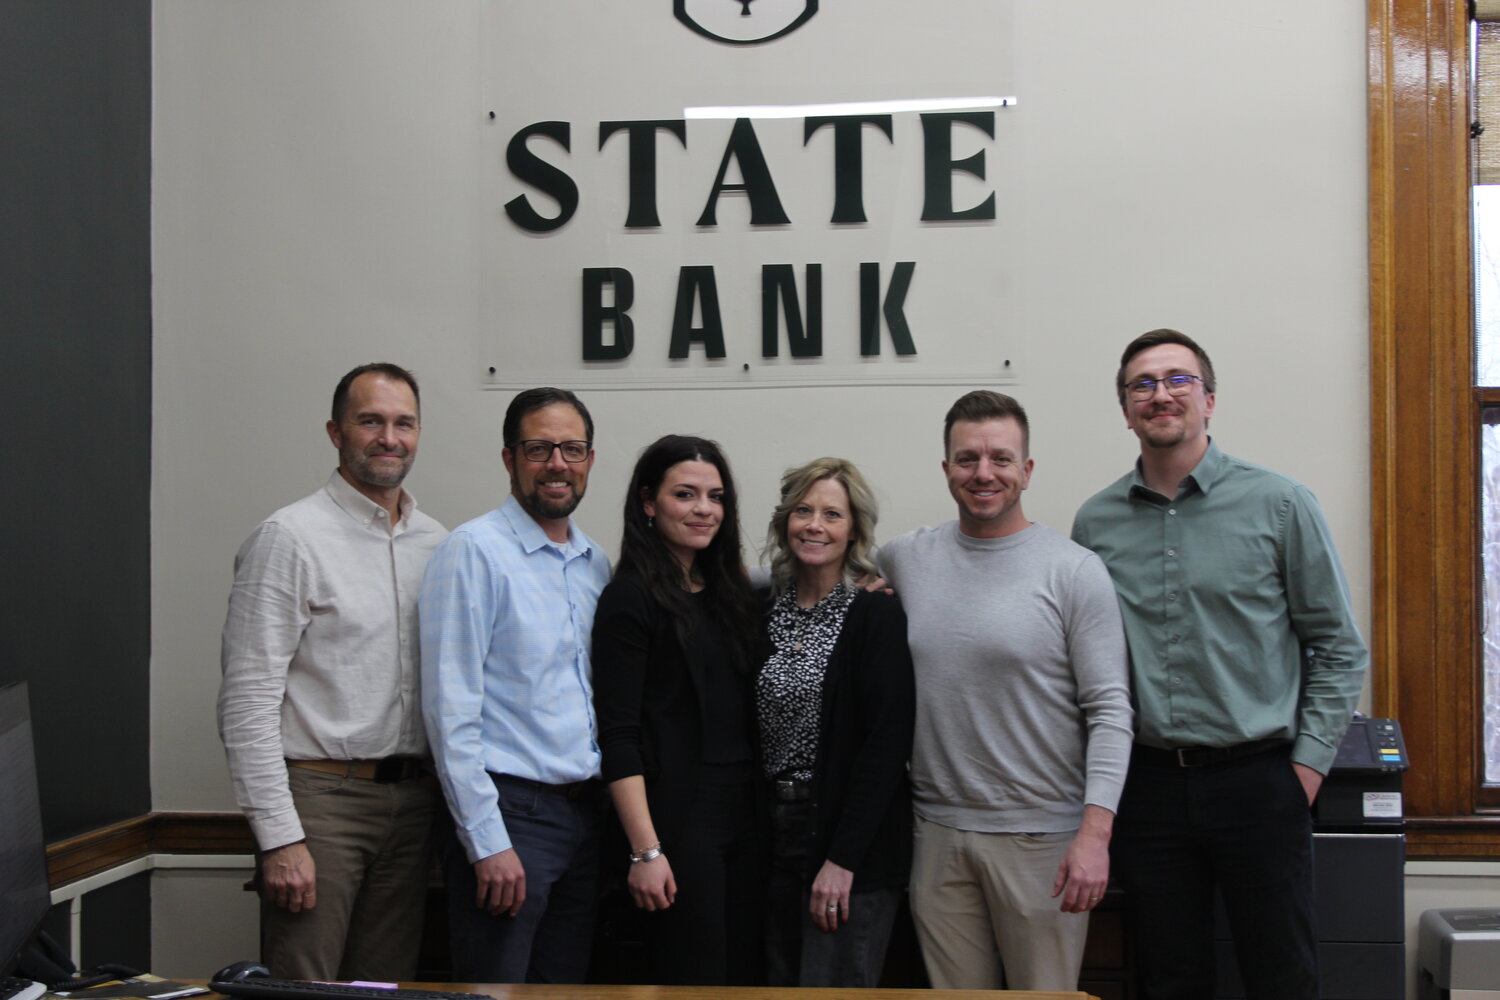 State Bank President Jon Dolezal, CEO Cody Bateman, personal banker and loan processor Madison Maust, personal banker Ronnie Sommerville, Vice President of Business Development David O’Connell Jr., and loan officer Taylor Siemers are pictured earlier this month. Evanston’s newest bank held a grand opening on Friday, April 12. It is located inside the old Post Office.